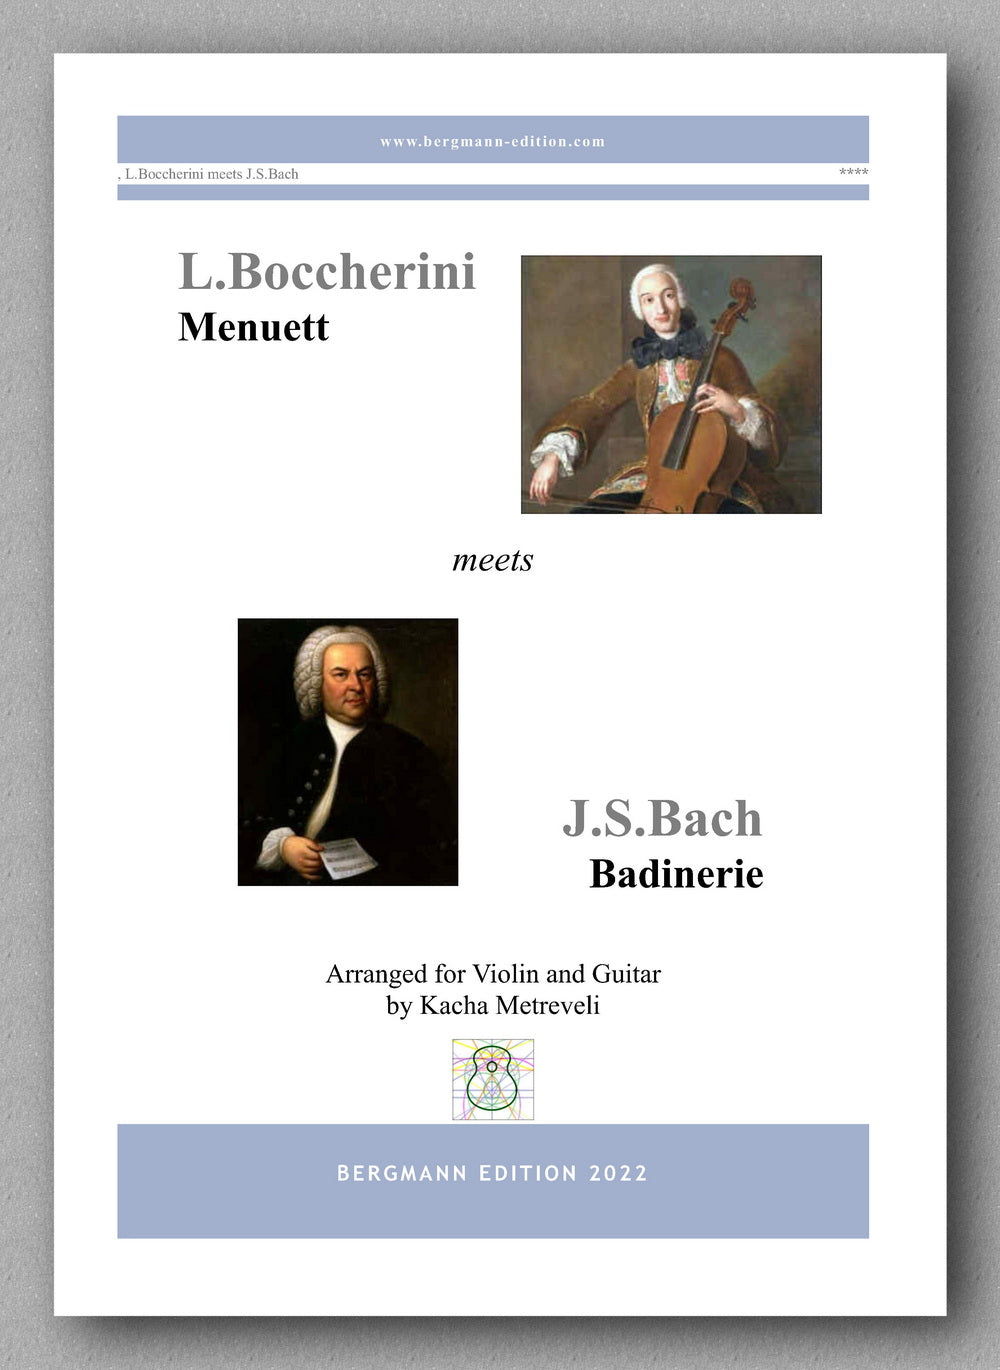 Boccherini meets Bach - preview of the cover